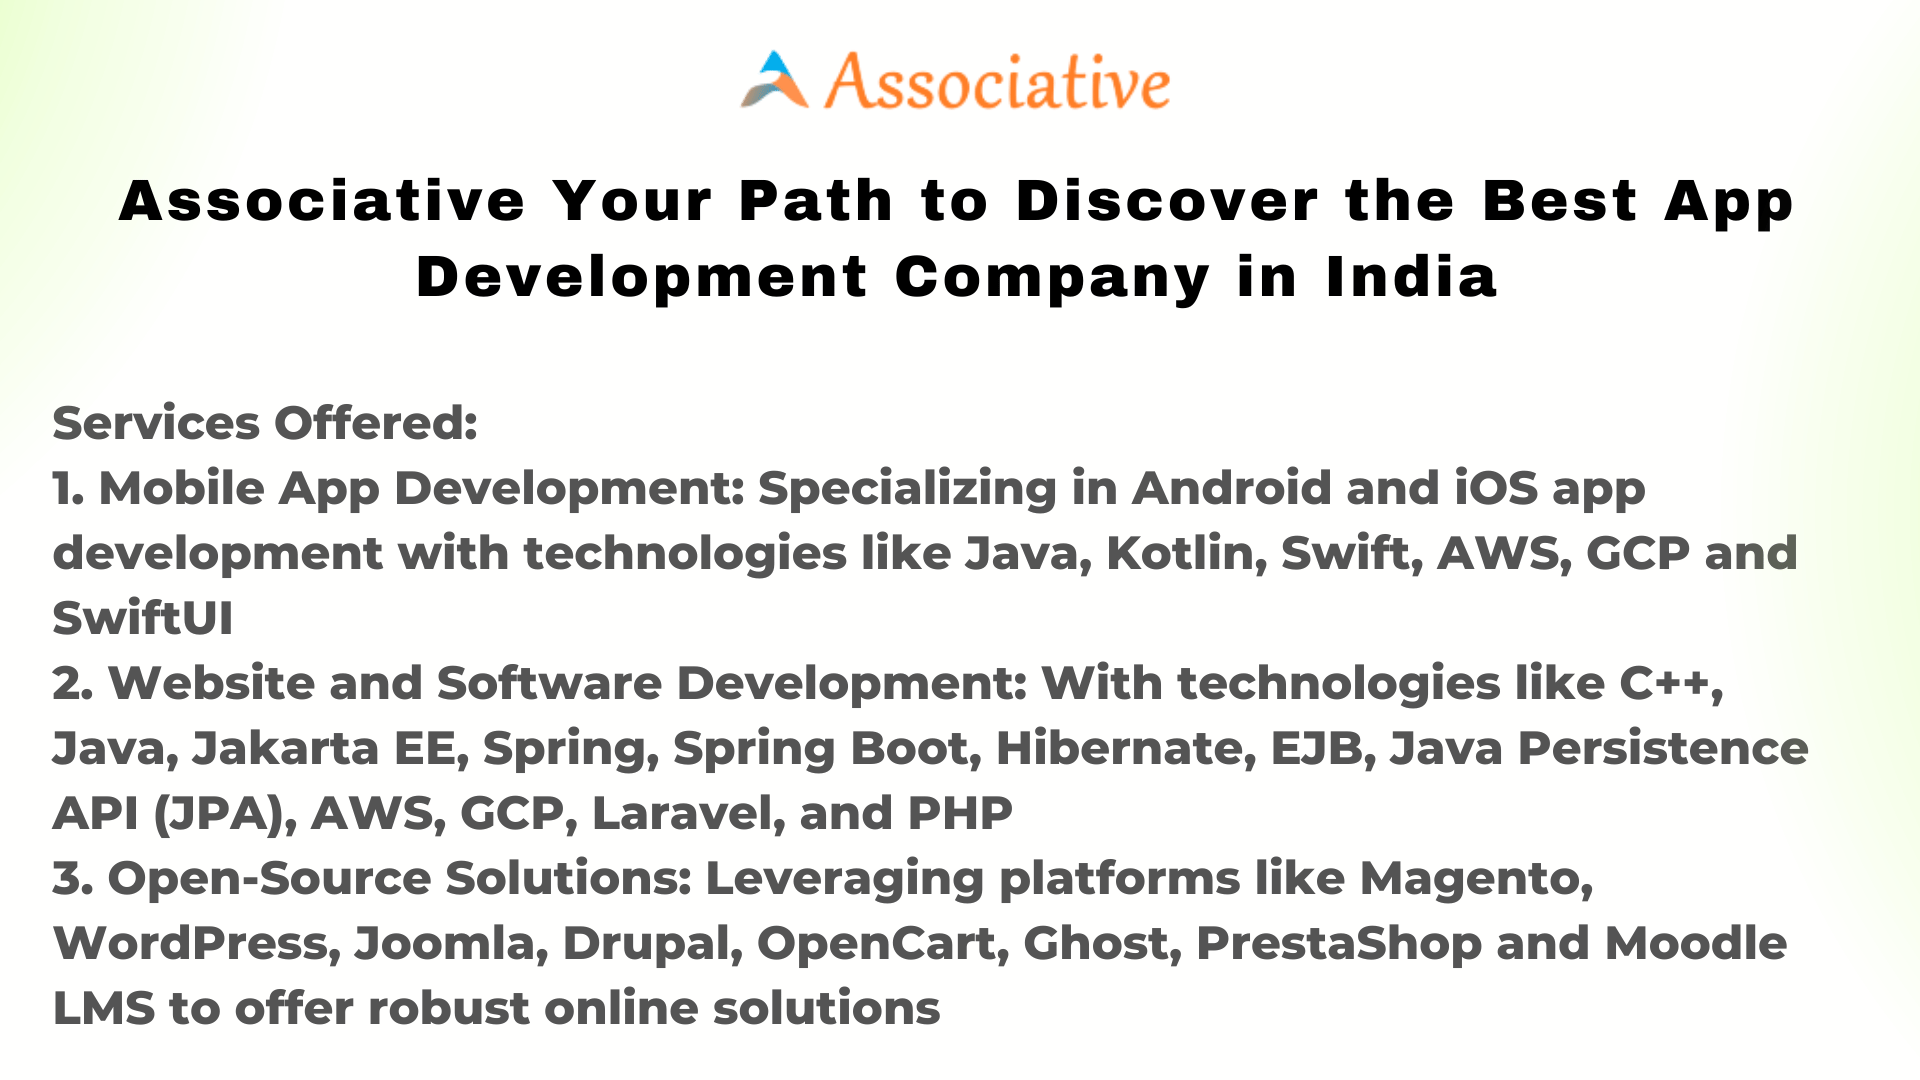 Associative Your Path to Discover the Best App Development Company in India